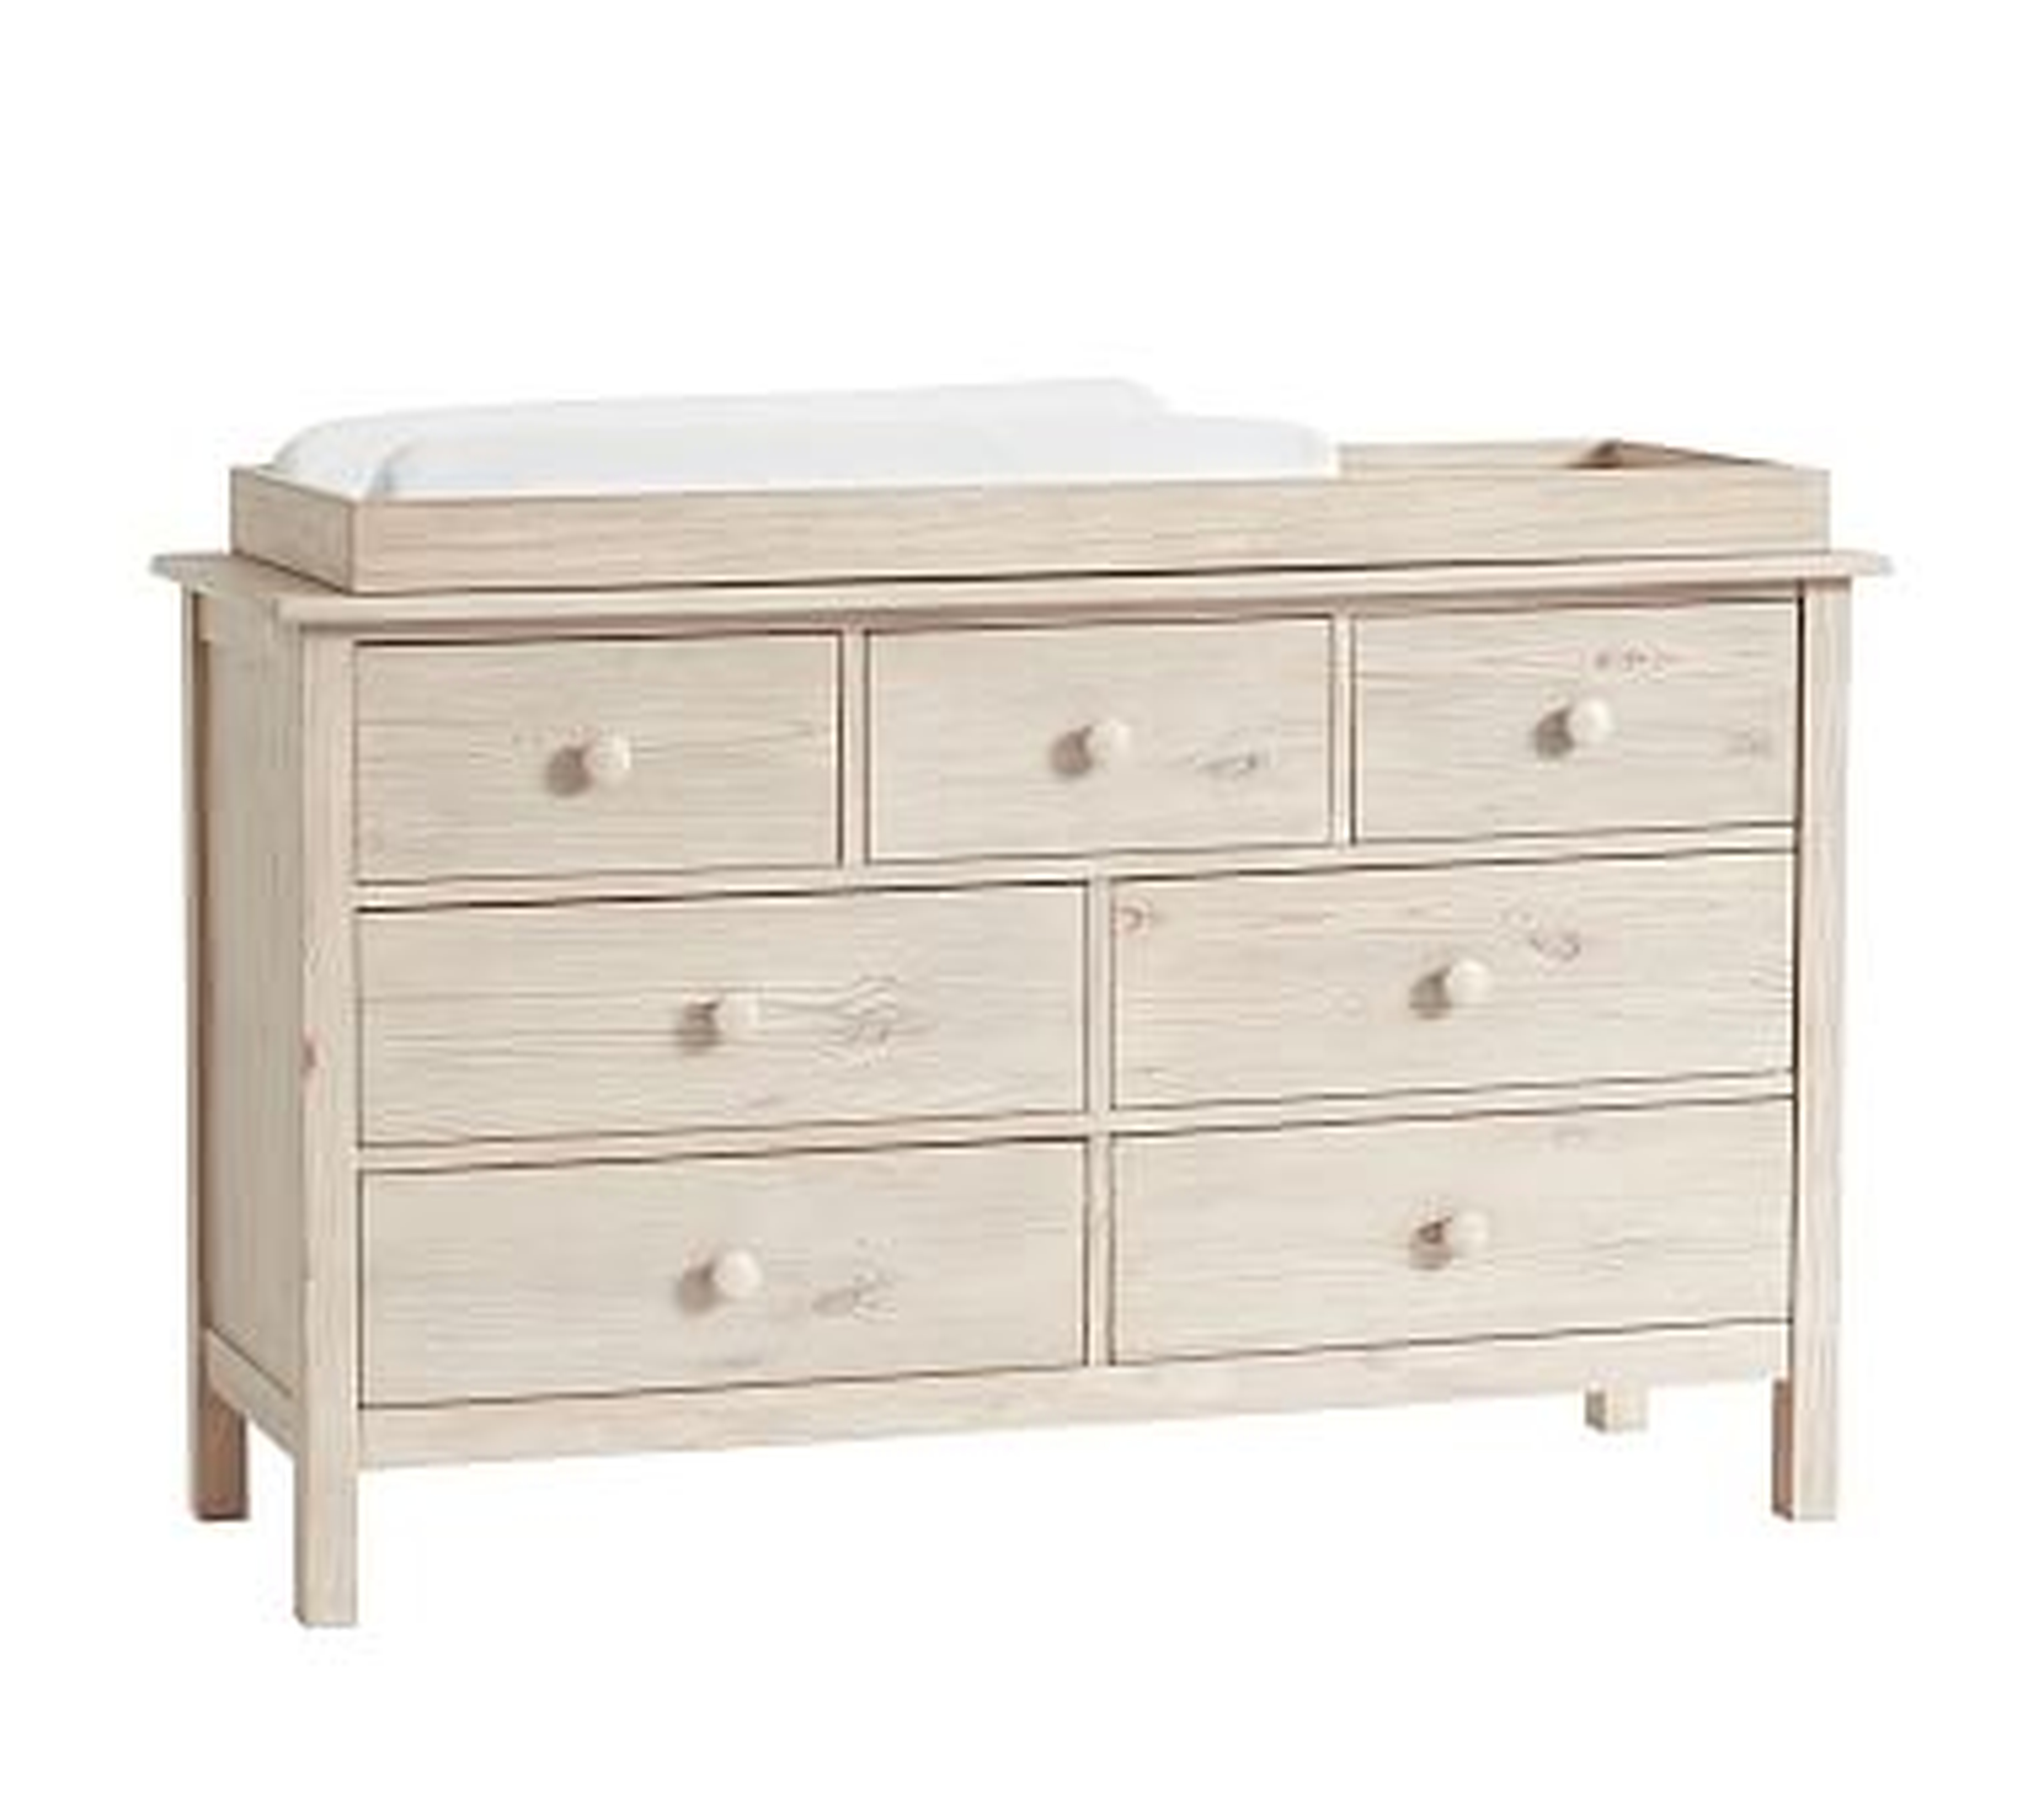 Kendall Extra Wide Nursery Dresser &amp; Topper Set, Weathered White, Flat Rate - Pottery Barn Kids